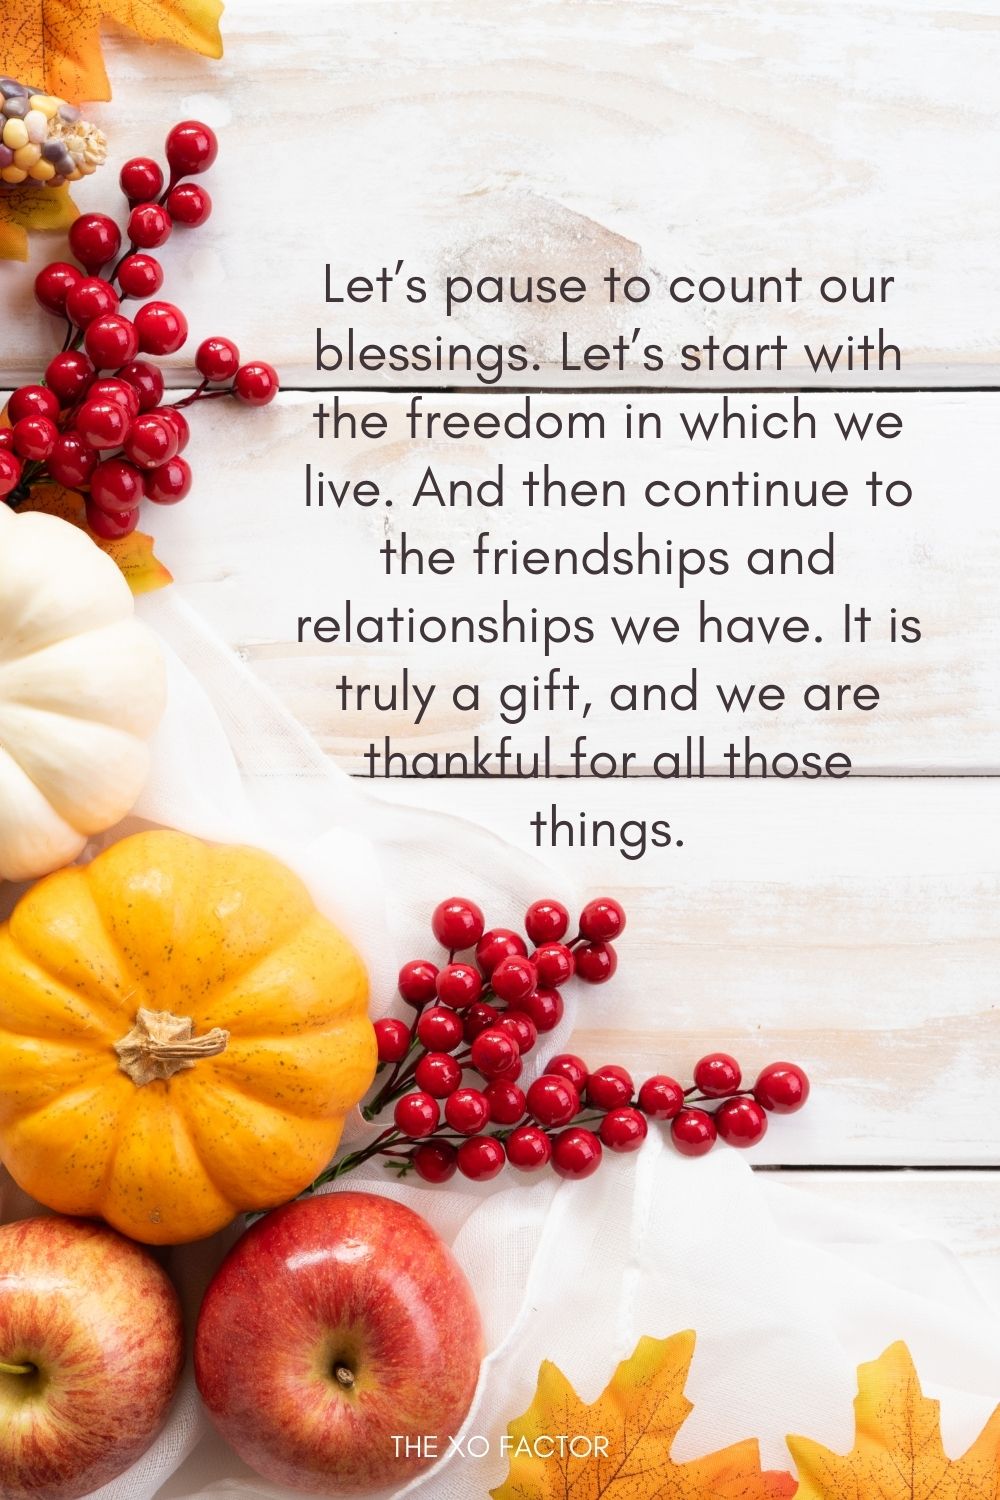 Let’s pause to count our blessings. Let’s start with the freedom in which we live. And then continue to the friendships and relationships we have. It is truly a gift, and we are thankful for all those things.